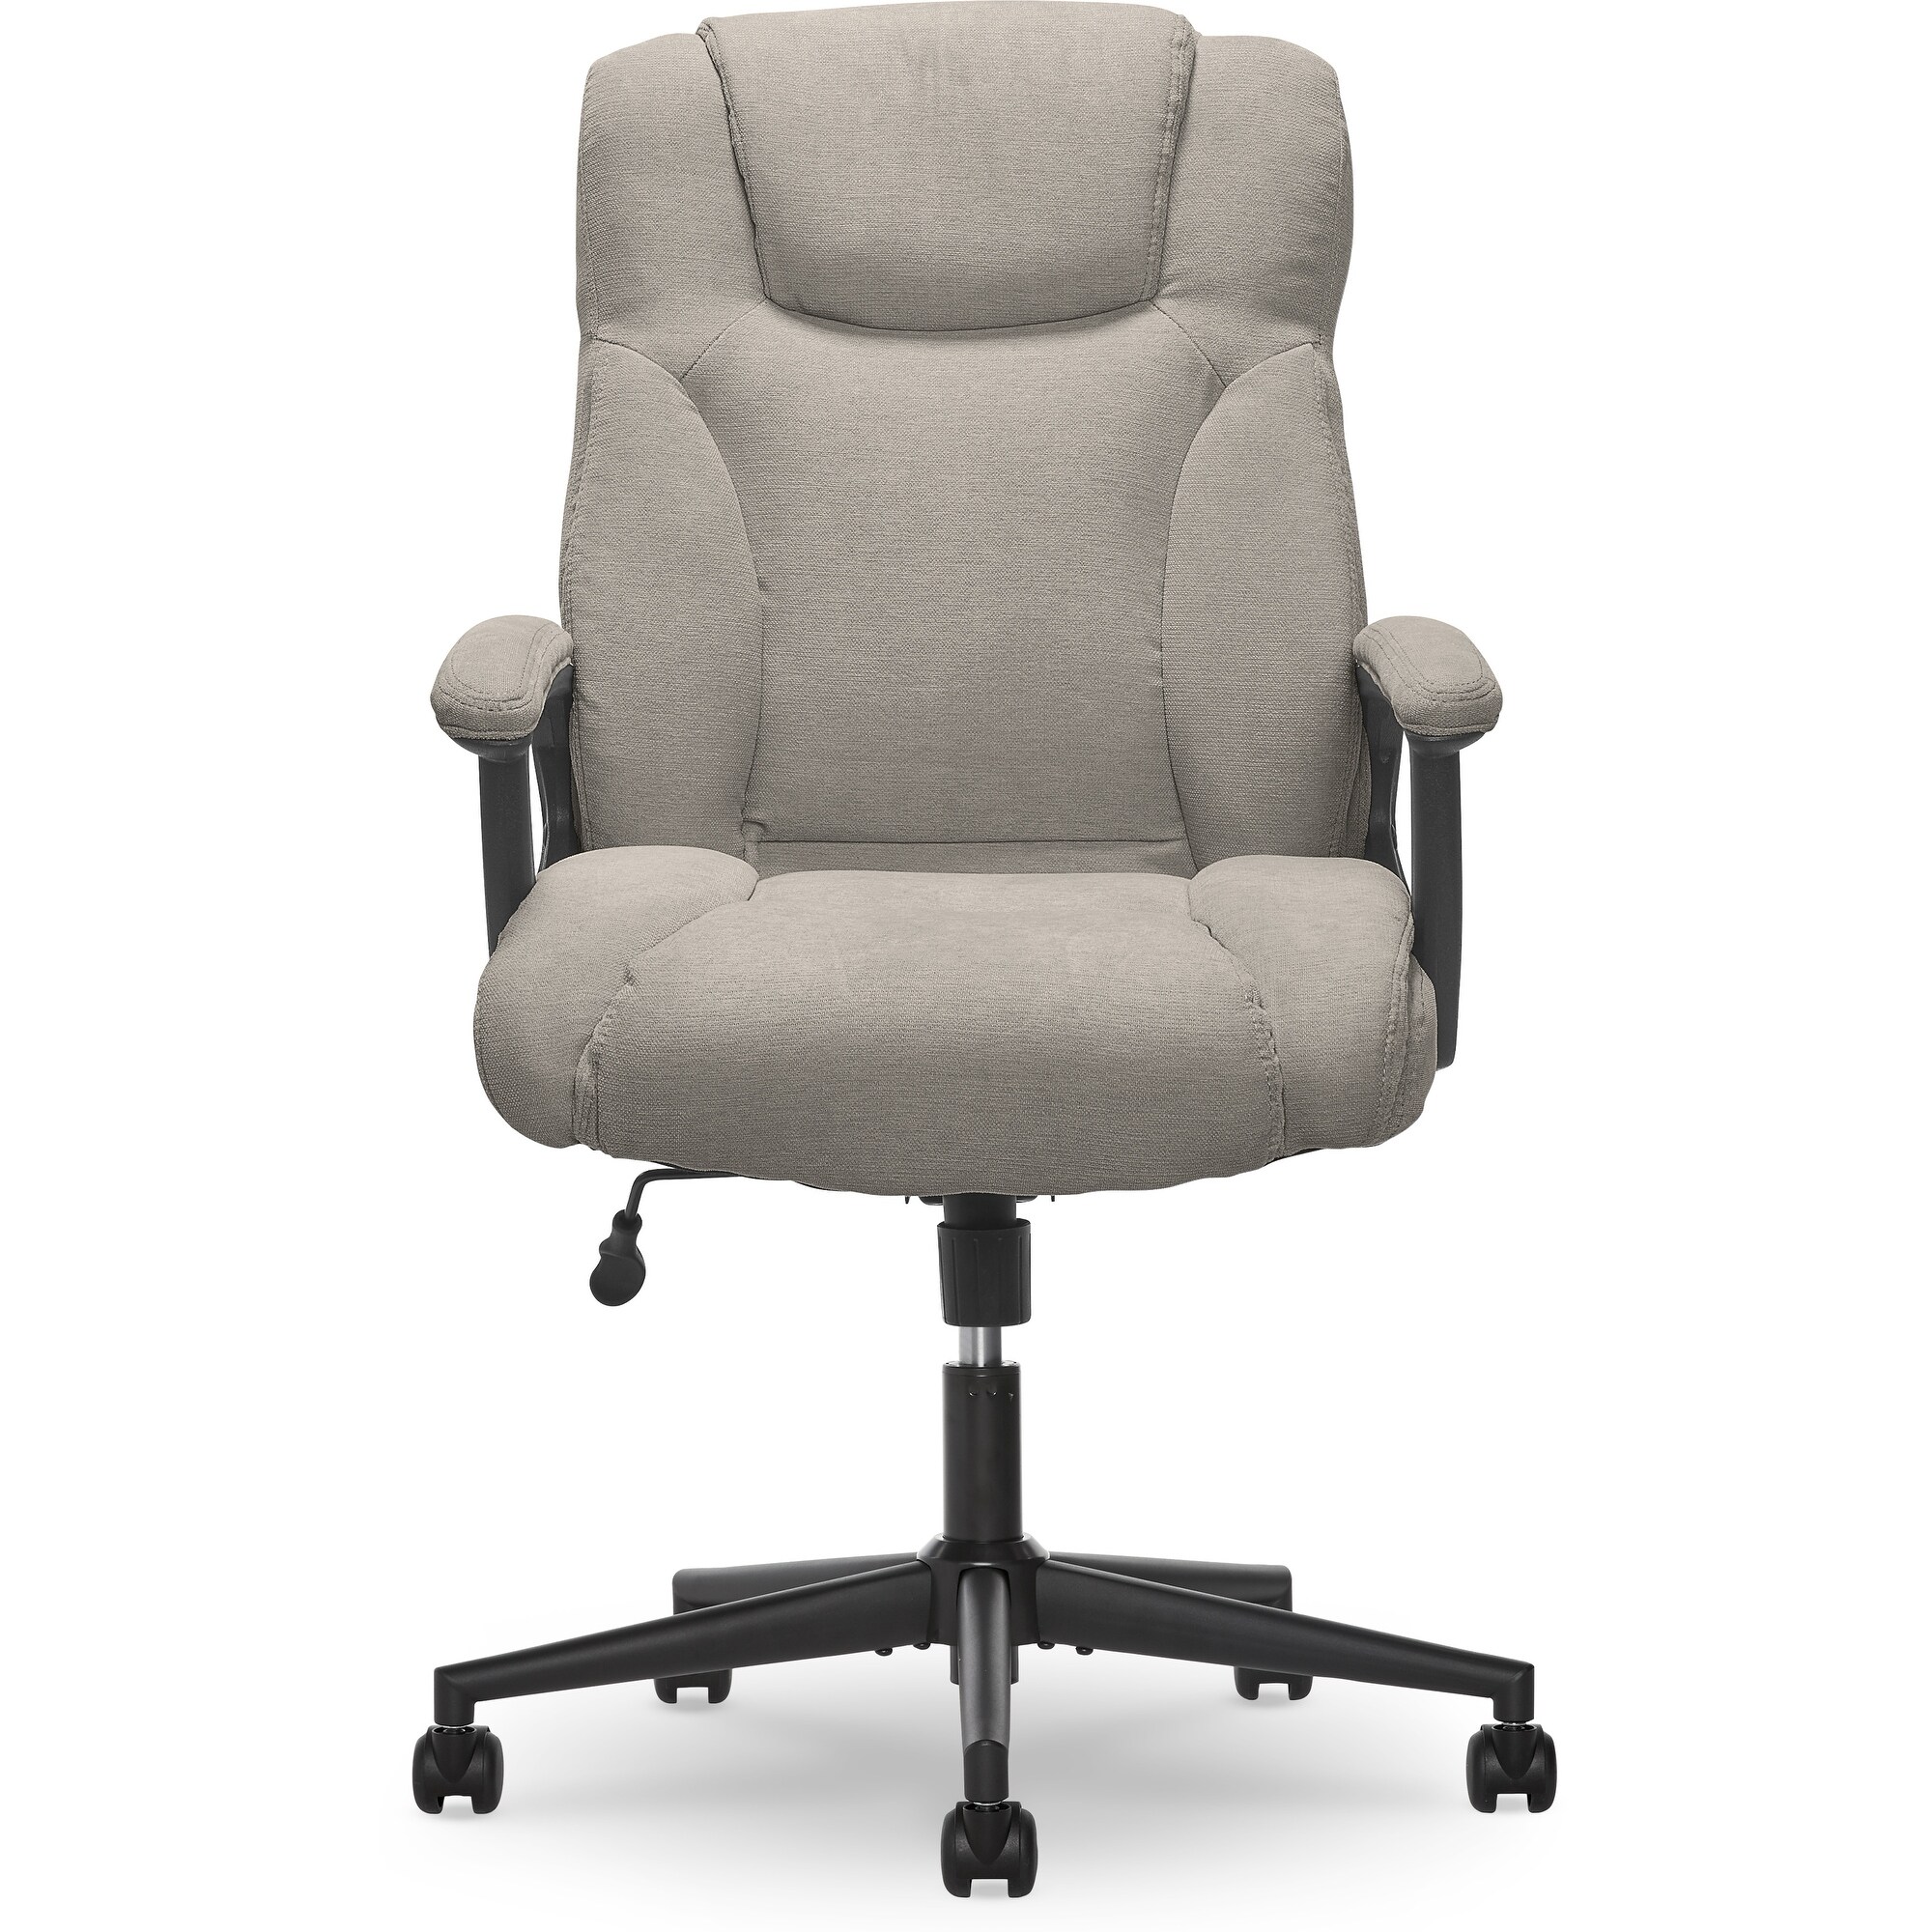 https://ak1.ostkcdn.com/images/products/is/images/direct/55215d9029047799991ea6bbfbae73e90c8b082a/Serta-Connor-Executive-Office-Chair%2C-Ergonomic-Computer-Chair-with-Layered-Body-Pillows%2C-Contoured-Lumbar%2C-Adjustable-Seat.jpg